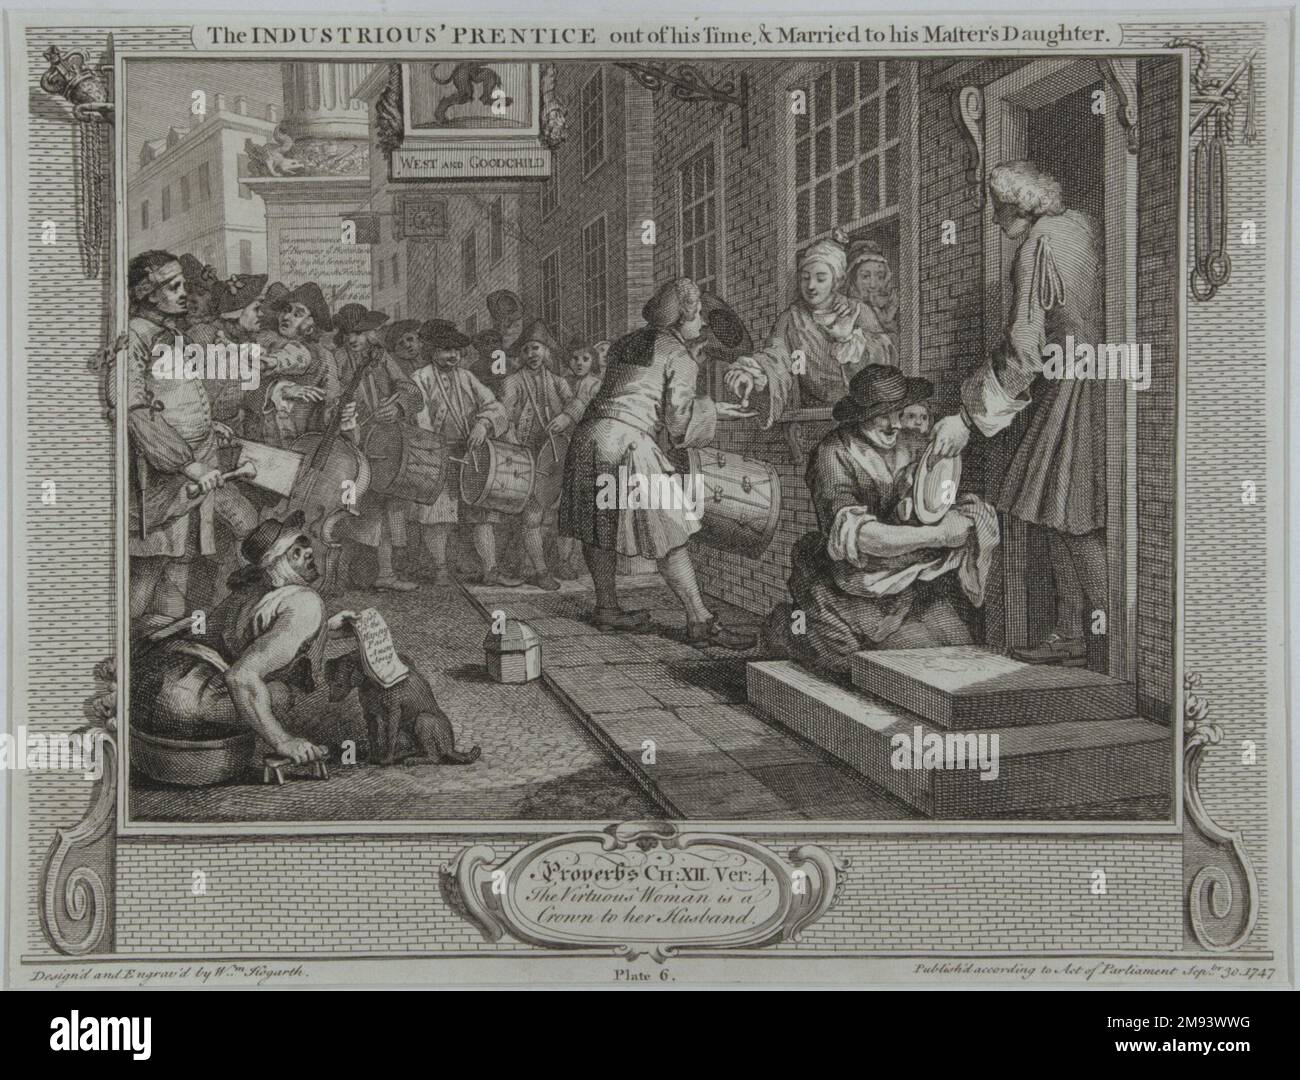 The Industrious Prentice Out of His Time William Hogarth (British, 1697-1764). The Industrious Prentice Out of His Time, 1747. Engraving on laid paper, 10 3/8 x 13 9/16 in. (26.3 x 34.5 cm).   European Art 1747 Stock Photo